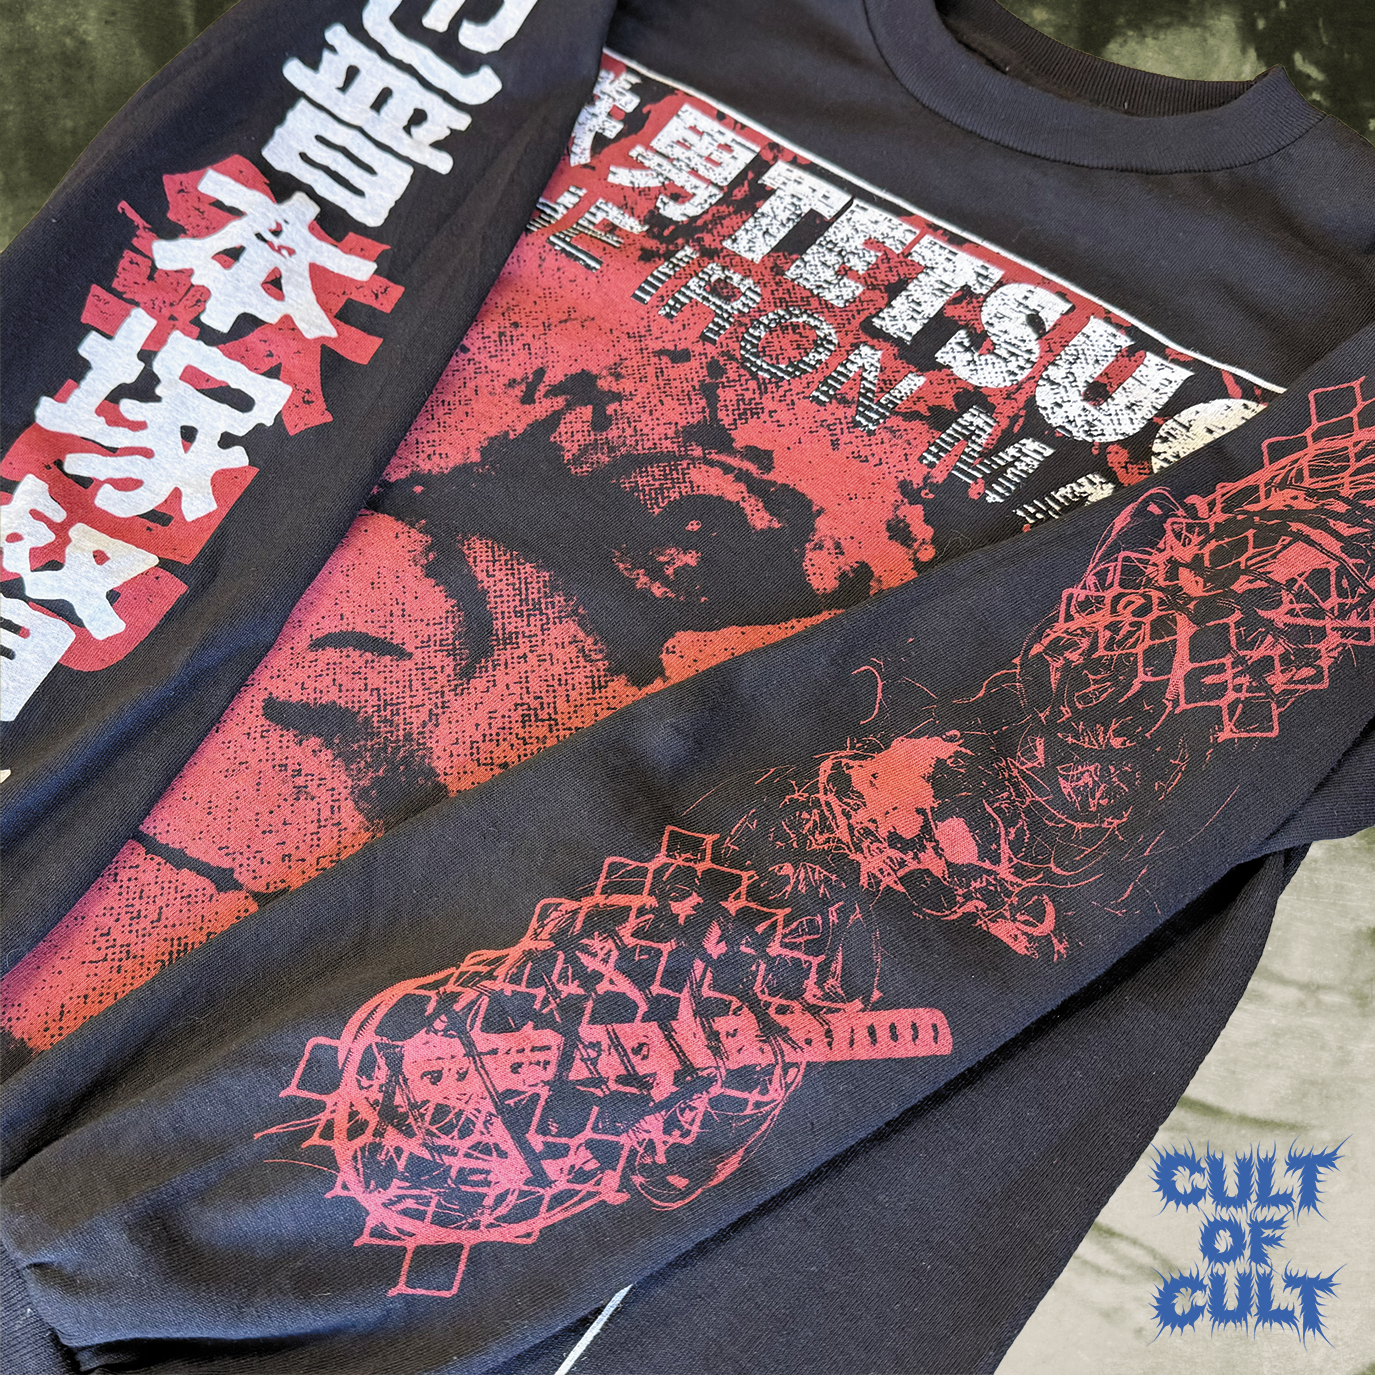 The front and sleeves of the black version of the shirt. There is a zoomed in detail shot of both sleeves. One sleeve has the movie title and directors name in Japanese characters. The other sleeve features a collage of metal and chain link.